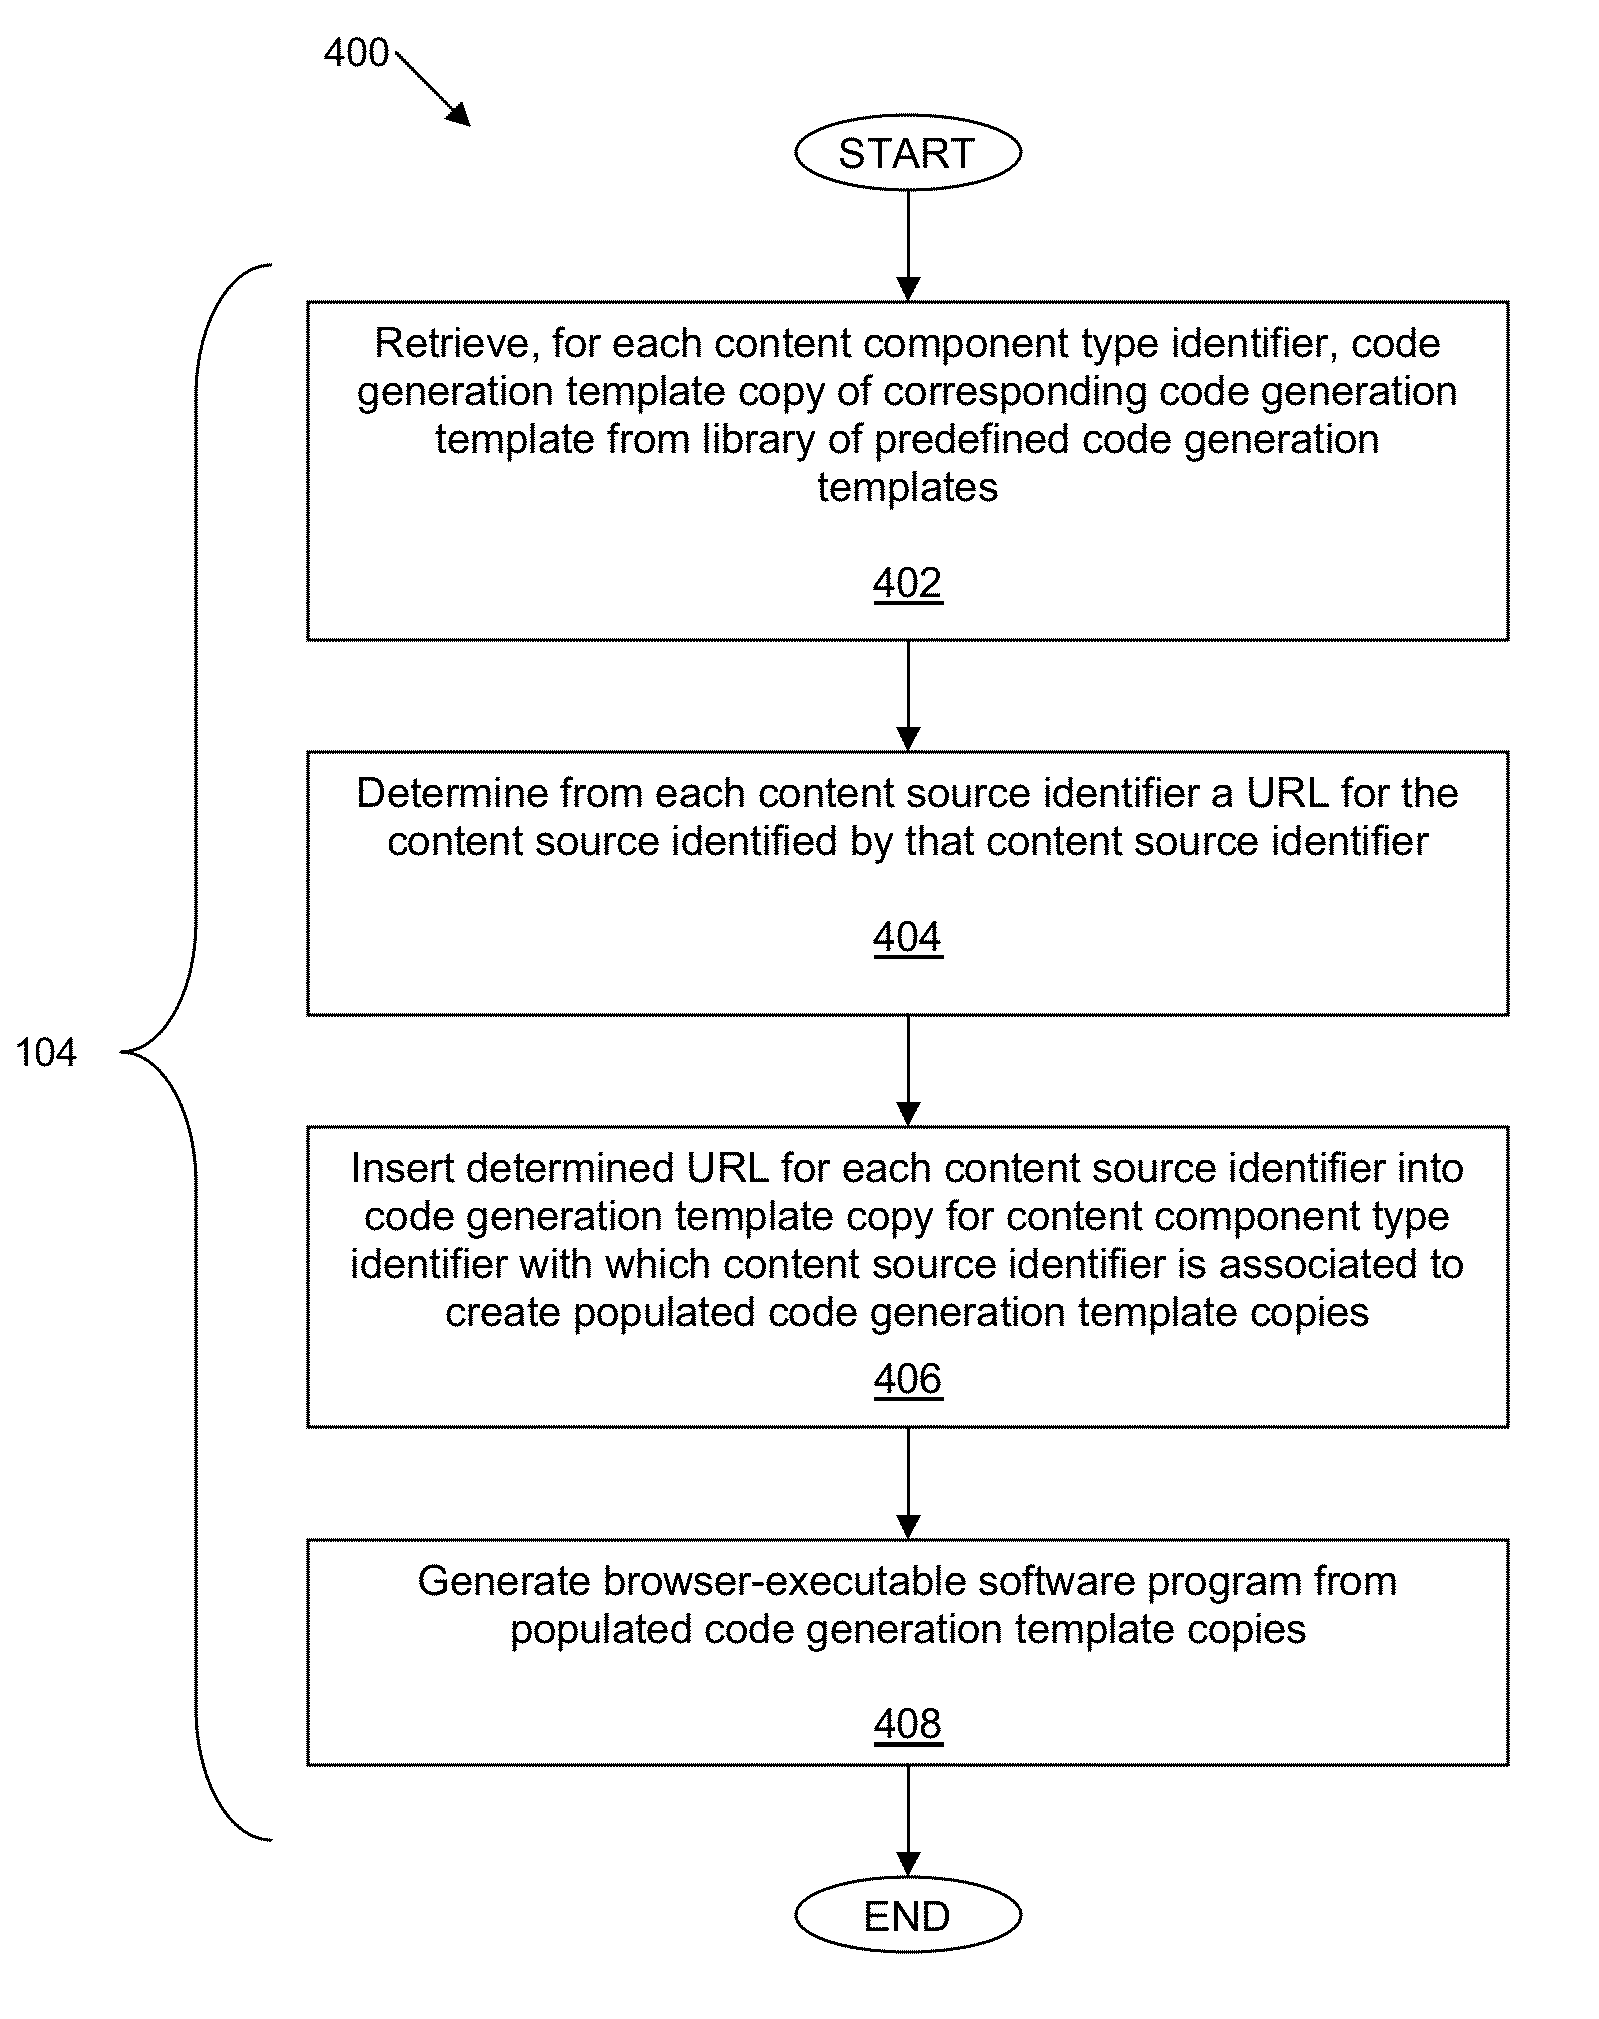 Executing a populated code template to generate a browser-executable software program to present a web page as a mobile application